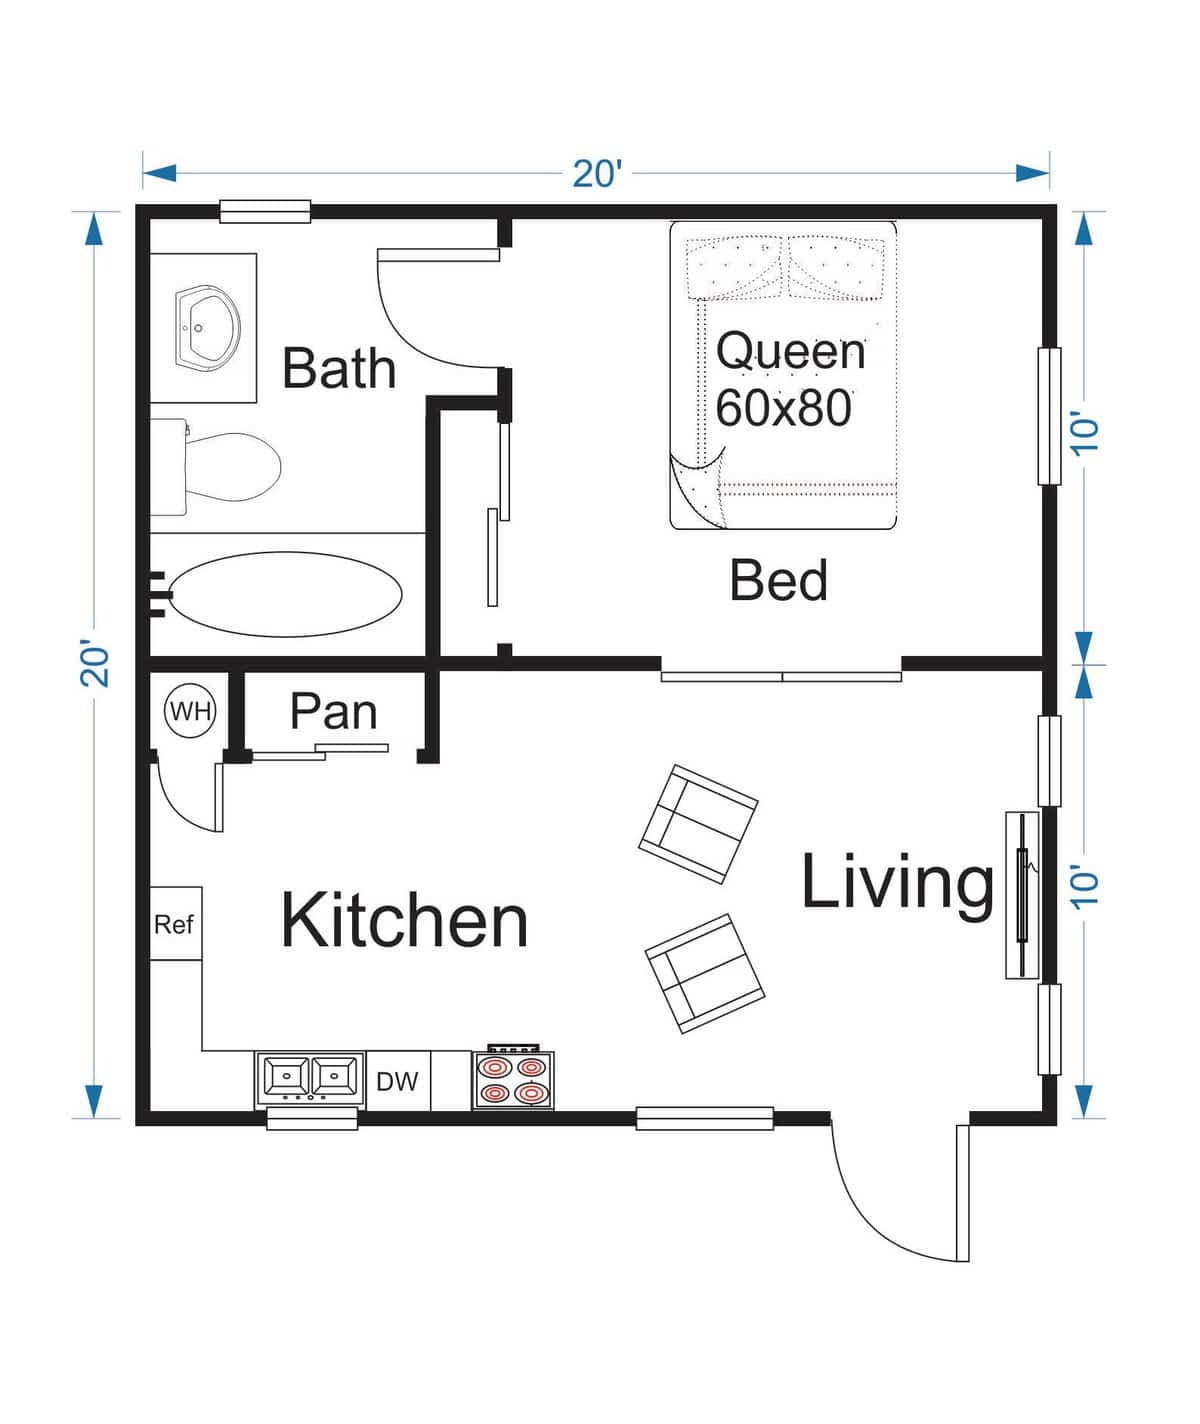 Tiny Home Floor Plan Gallery Robin Sheds